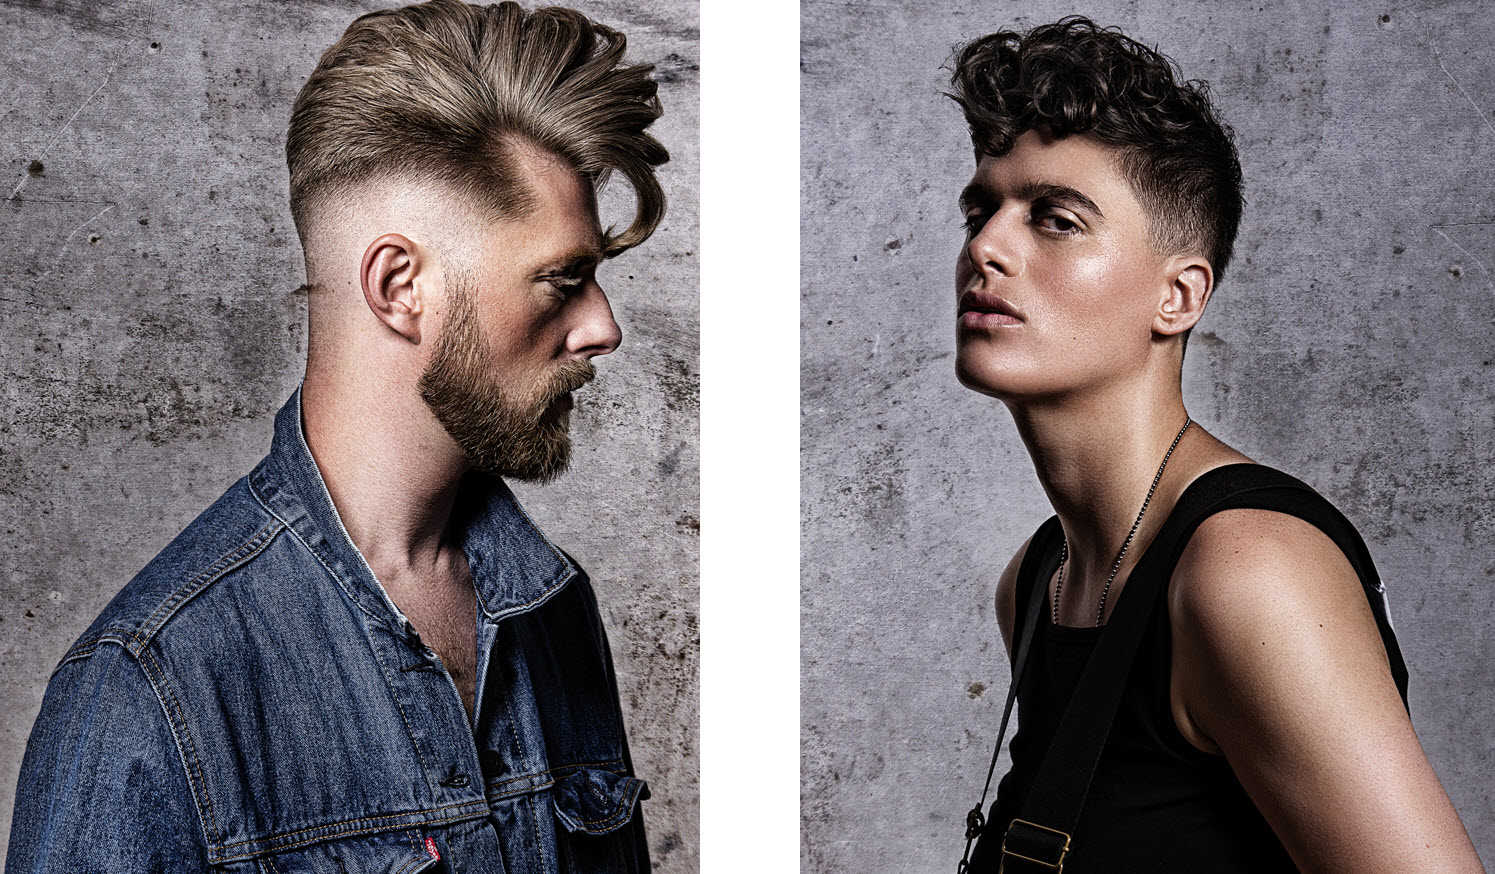 ch-naha-2019-finalists-mens-hairstylist-of-the-year